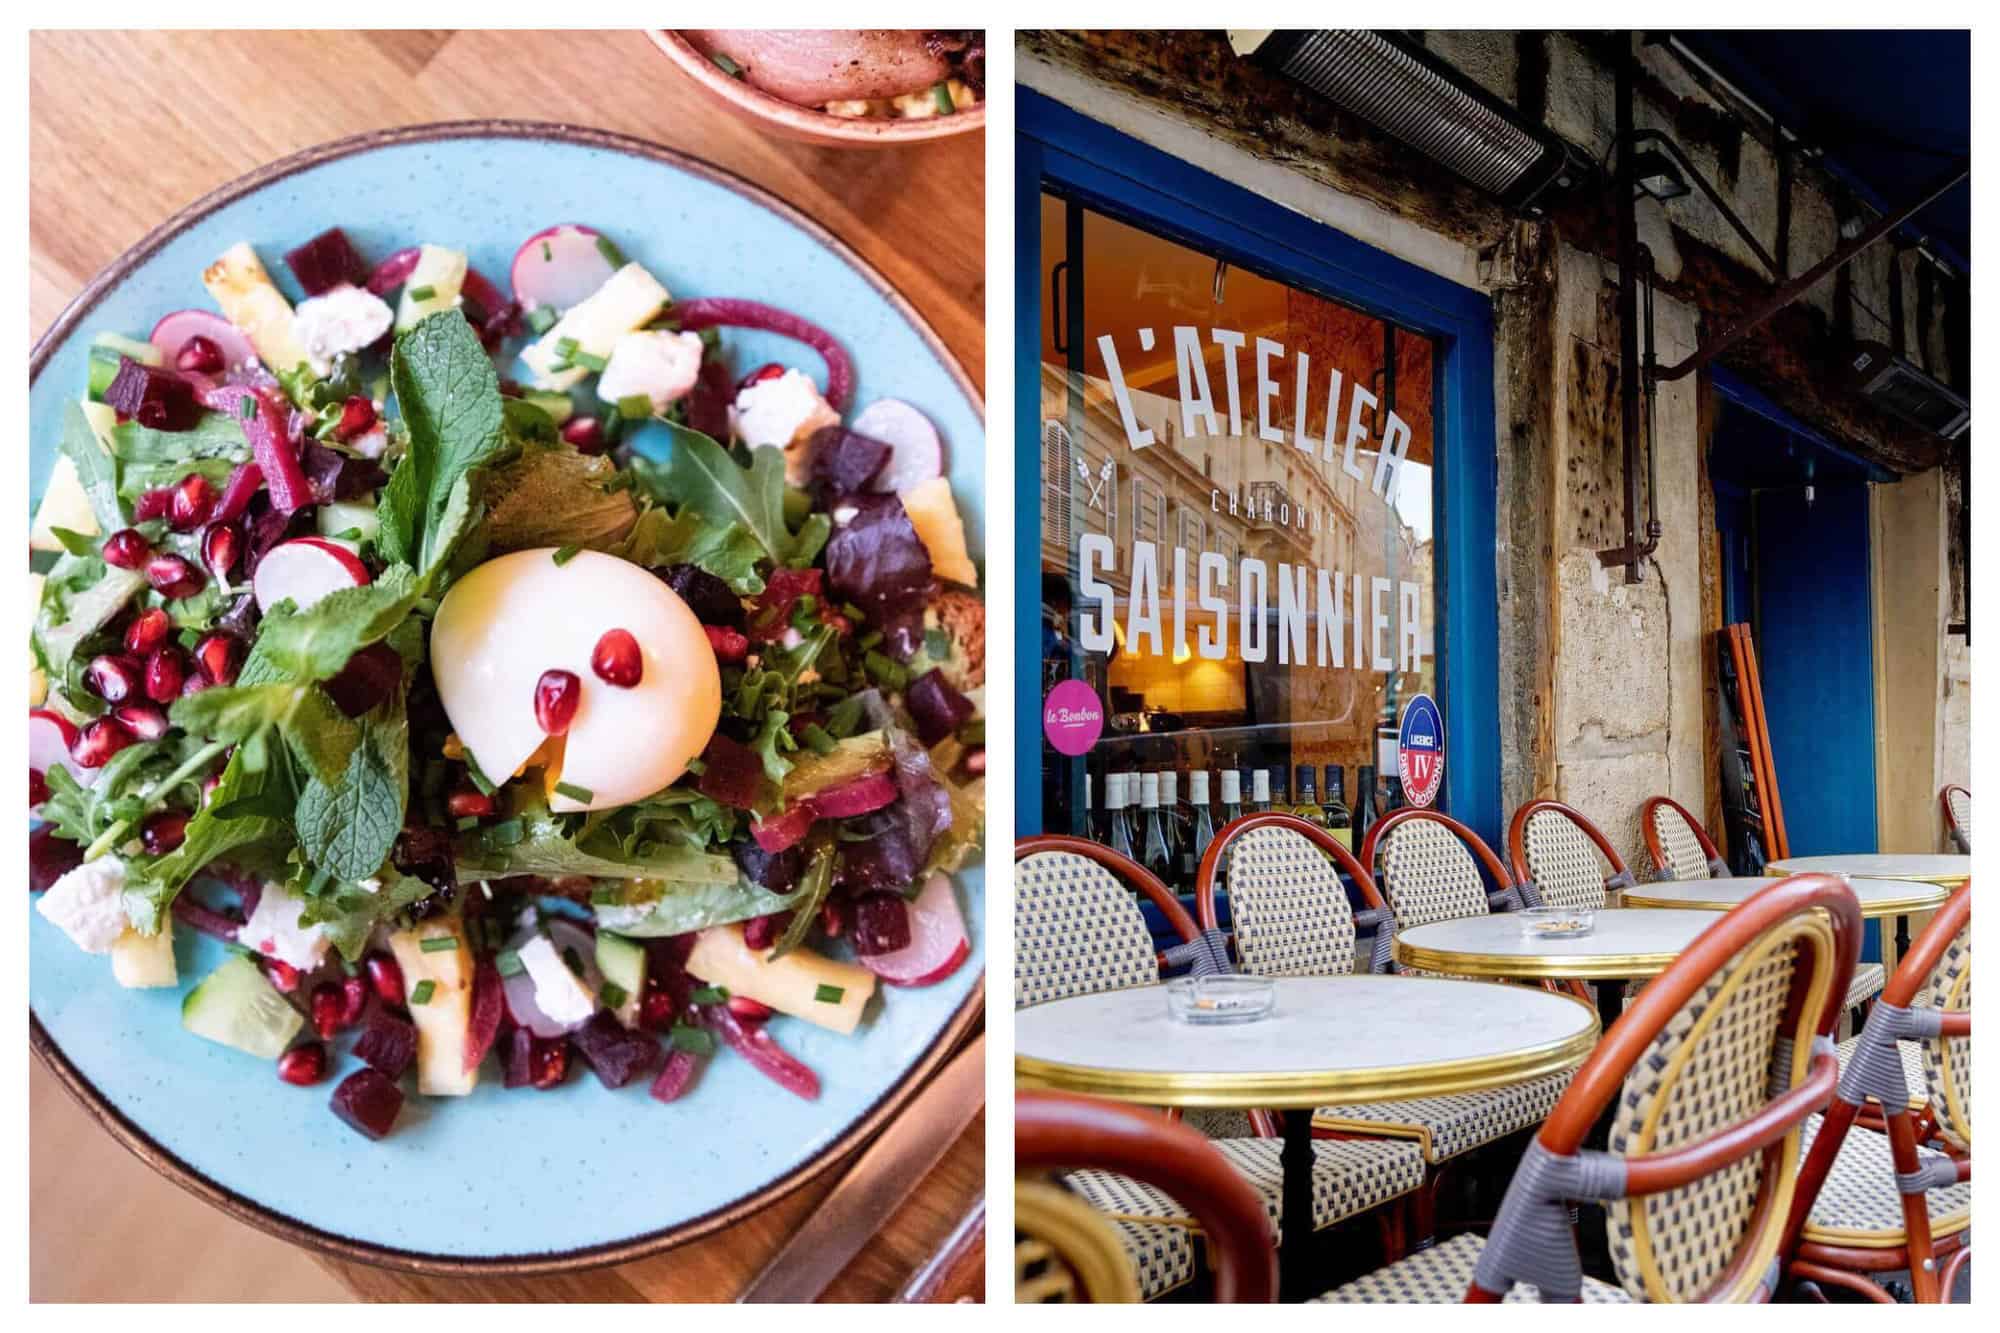 (Right) A Delicious salad plate from L'Atelier Saisonnier in Paris, filled with mint, roquette, beets, pomegranate seeds and an egg. (Left) The outside of a L'Atelier Saisonnier restaurant in Paris with checkered wire chairs and marble topped tables. 